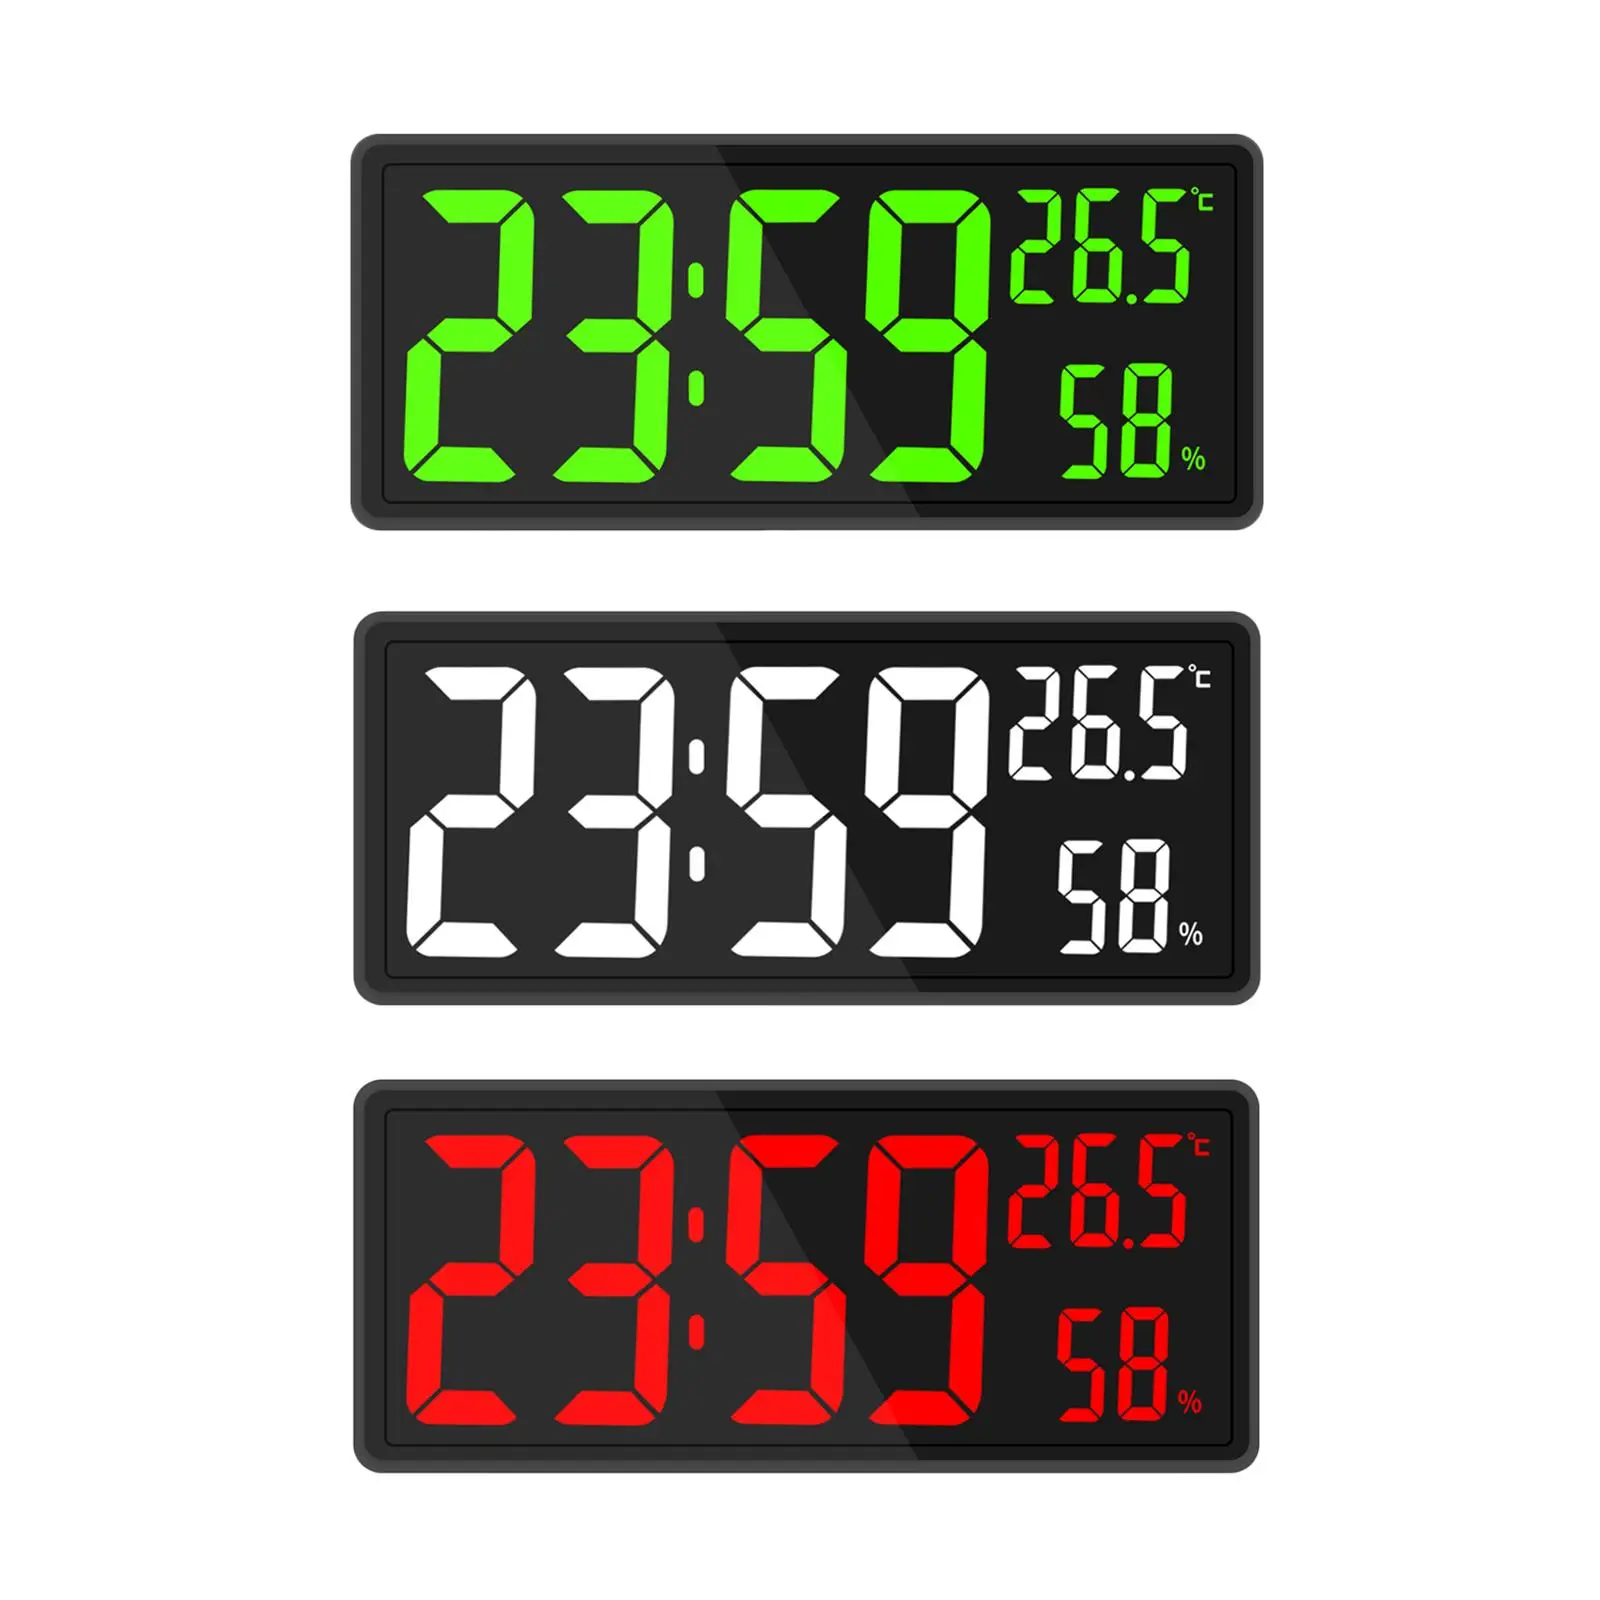 Large Digital Wall Clock with Indoor Temperature and Humidity for Office Gym